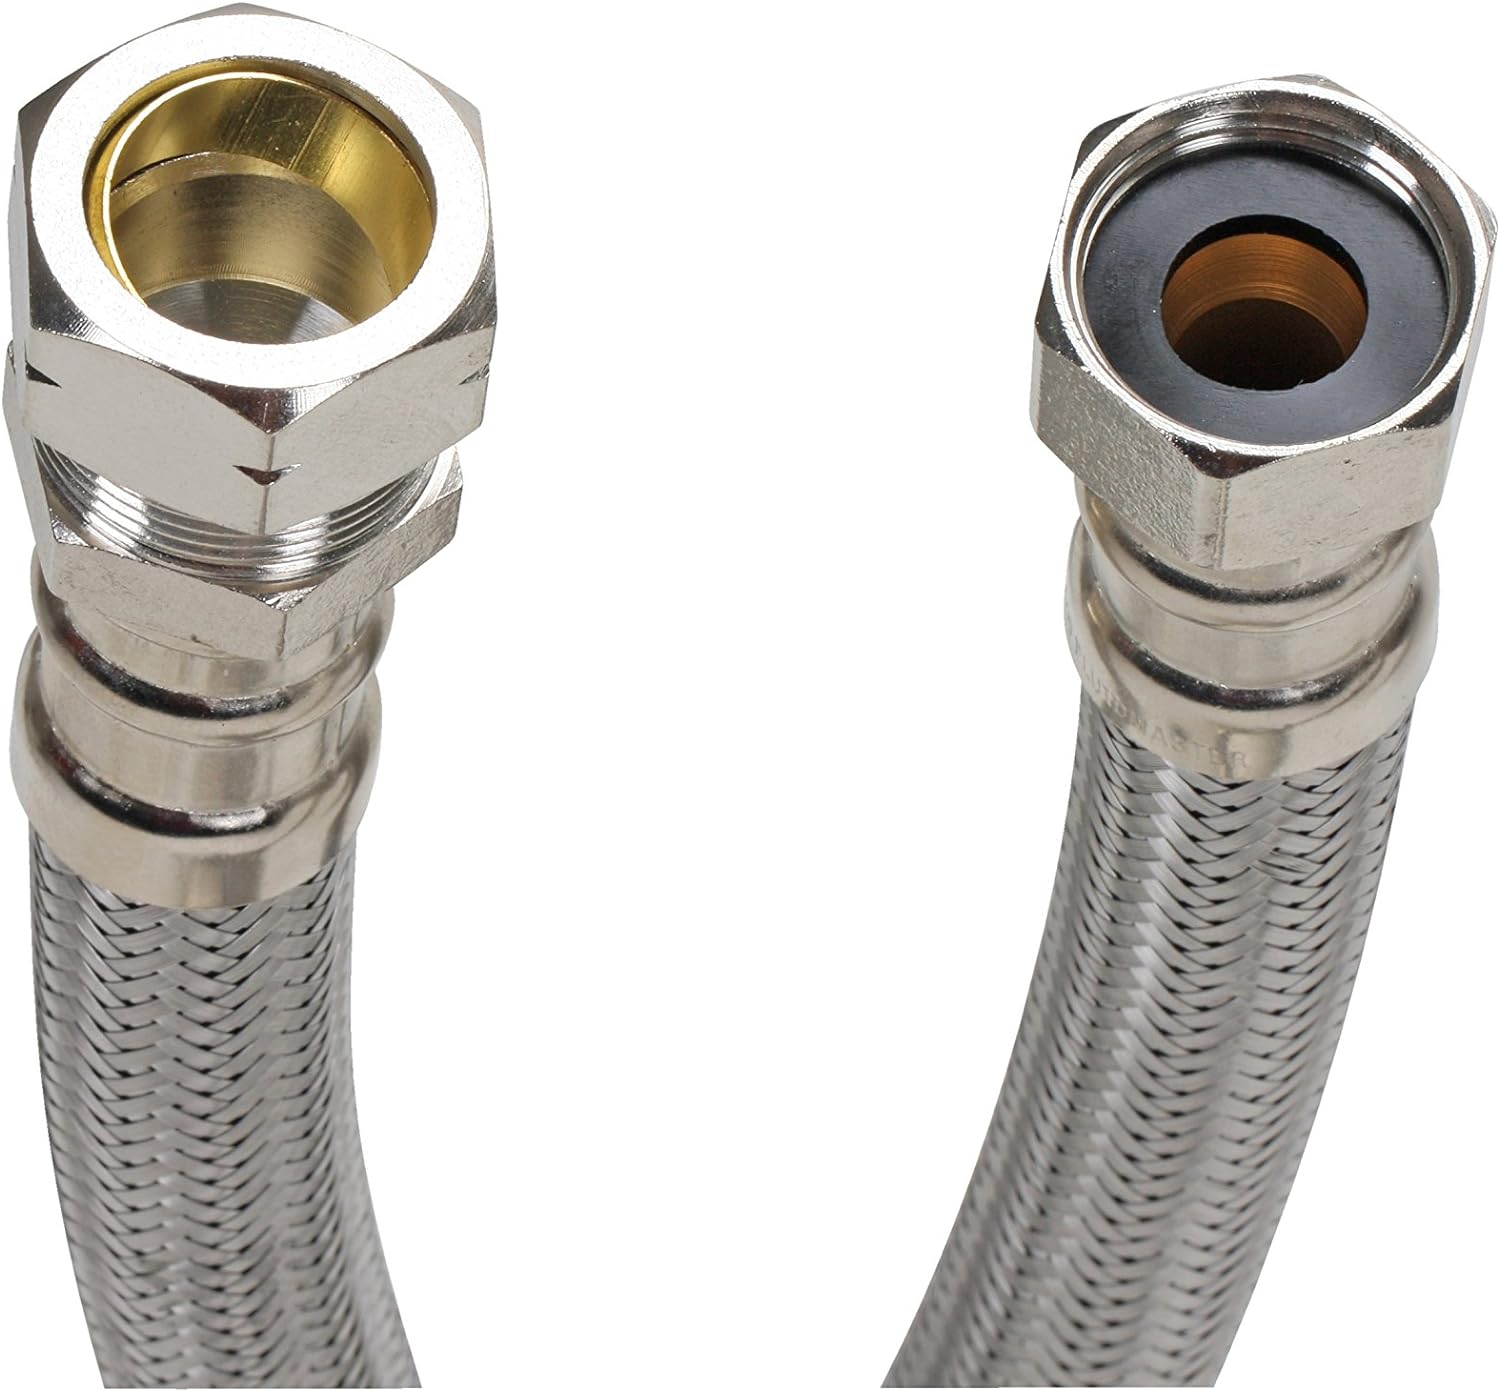 Fluidmaster B4h18 Water Heater Connector Braided Stainless Steel